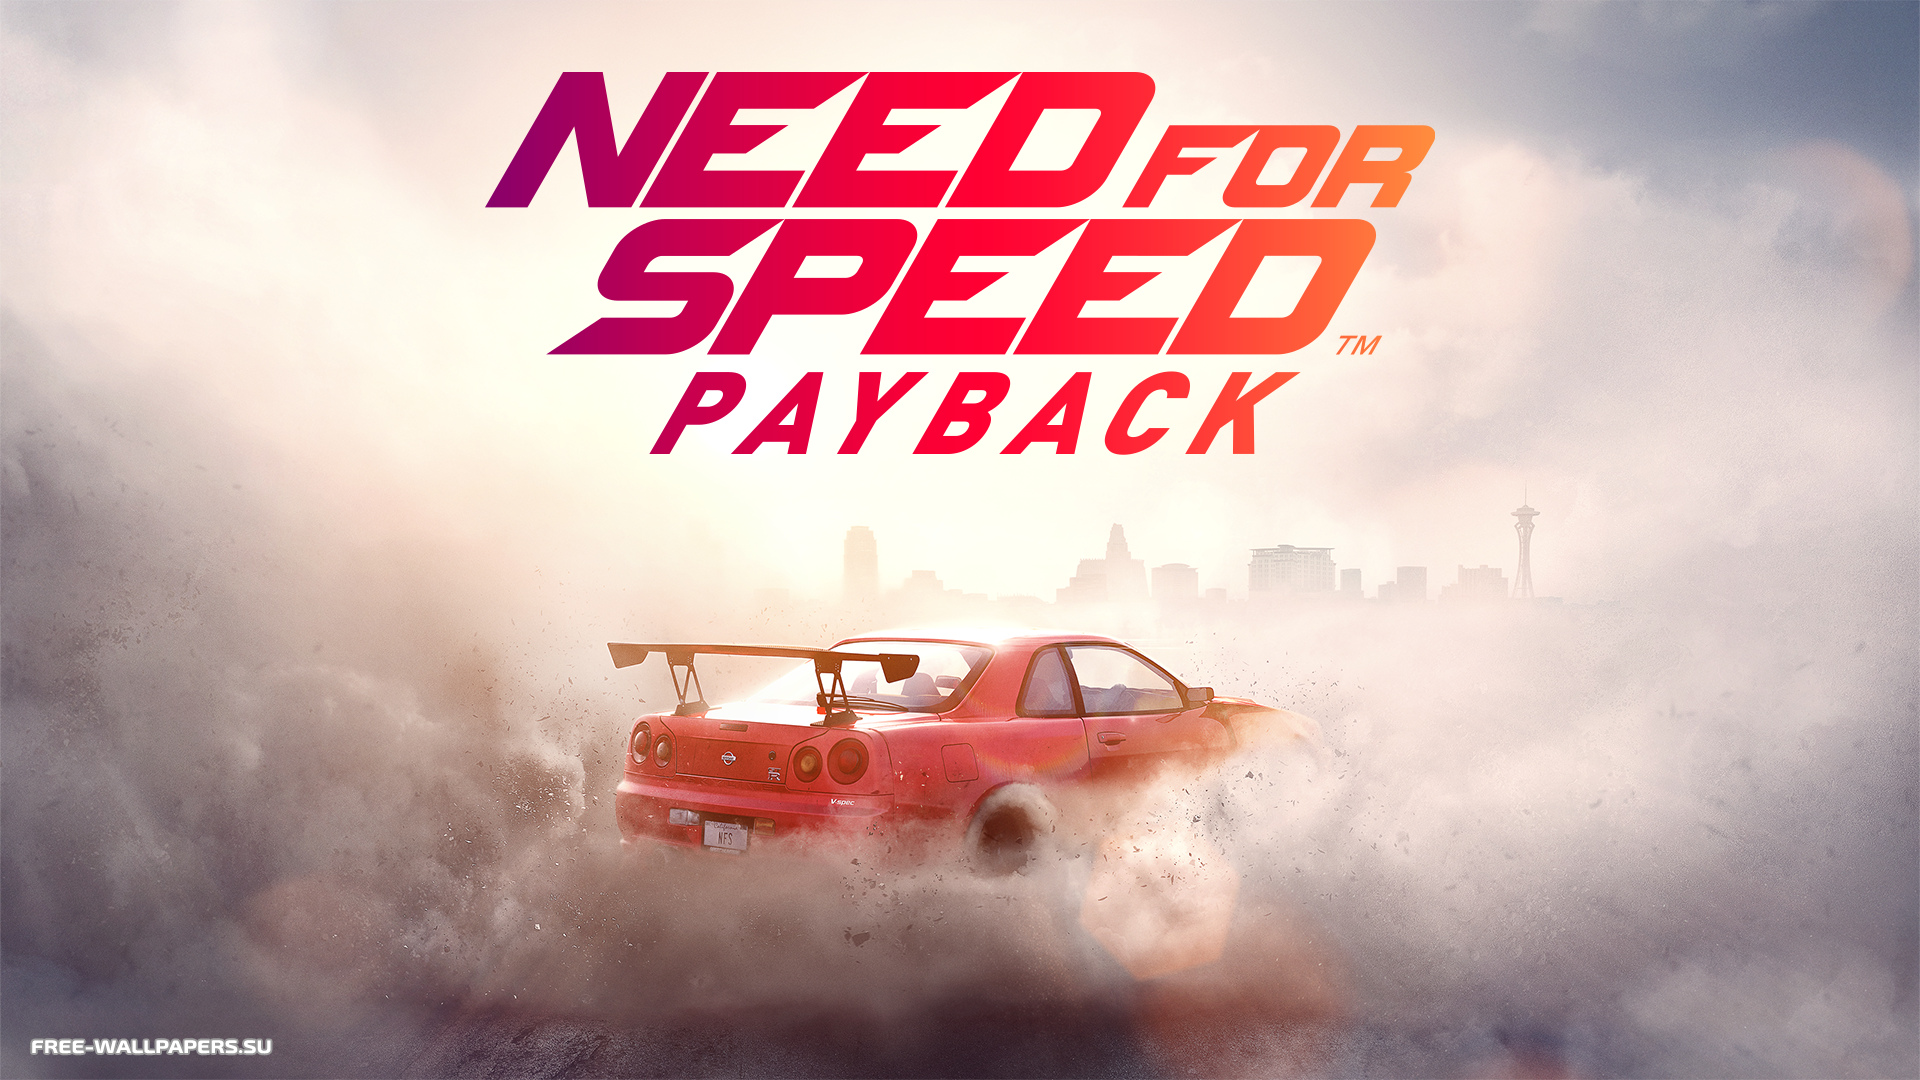 Need for speed 2017. Игра need for Speed Payback. Need for Speed Payback гонки. Need for Speed пейбек. Картинки need for Speed Payback.